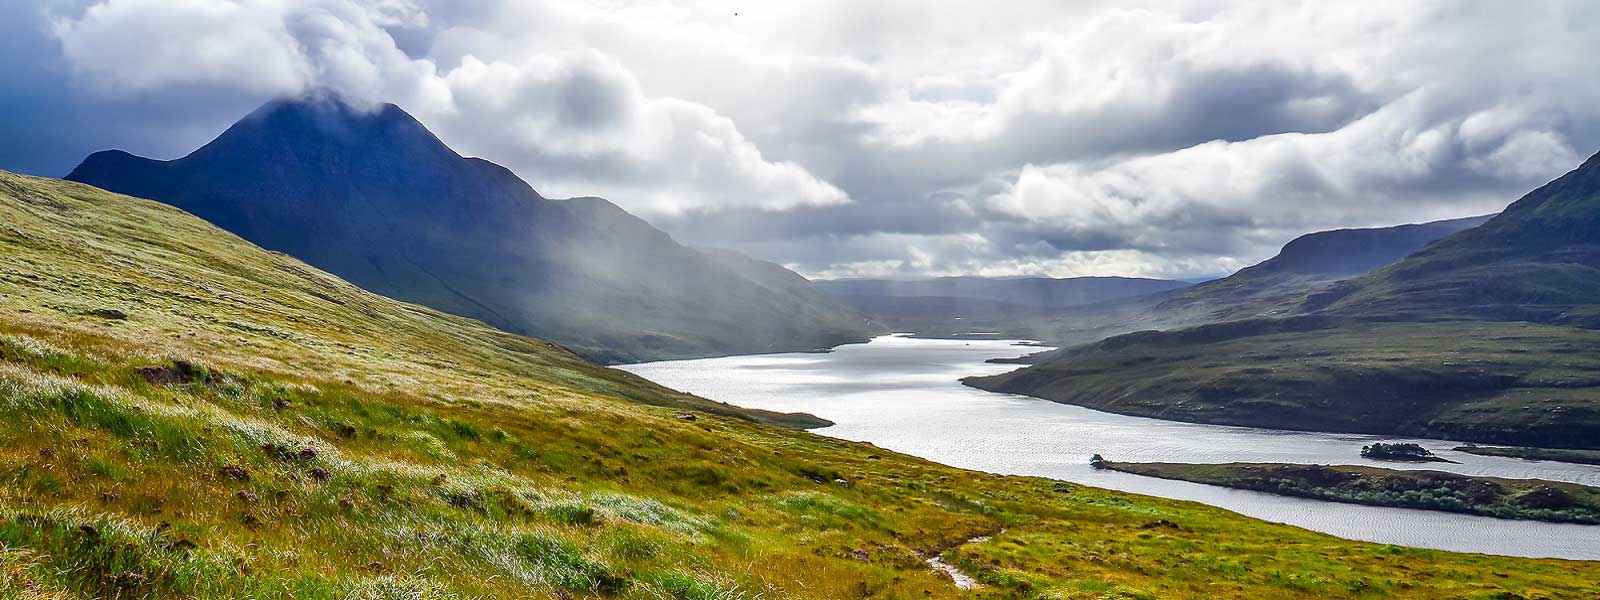 Water and hills in the Scottish Highlands